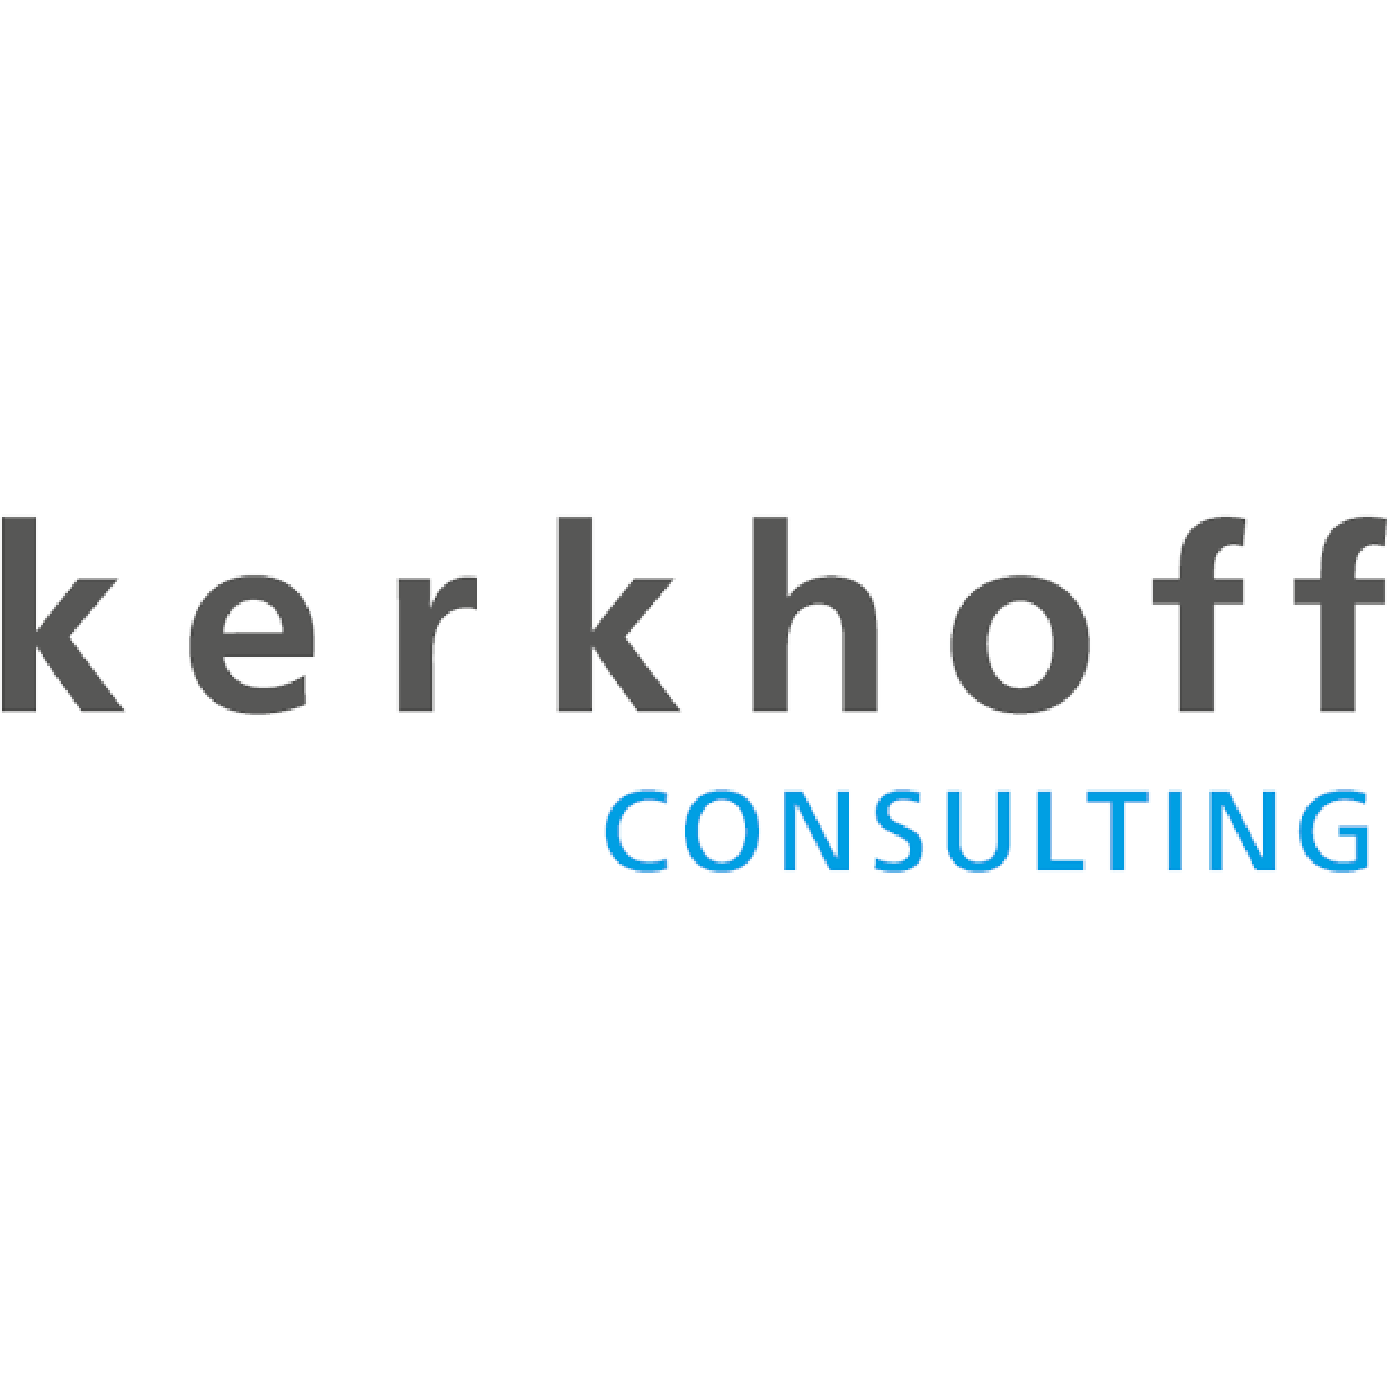 Kerkhoff_consulting 667x667px